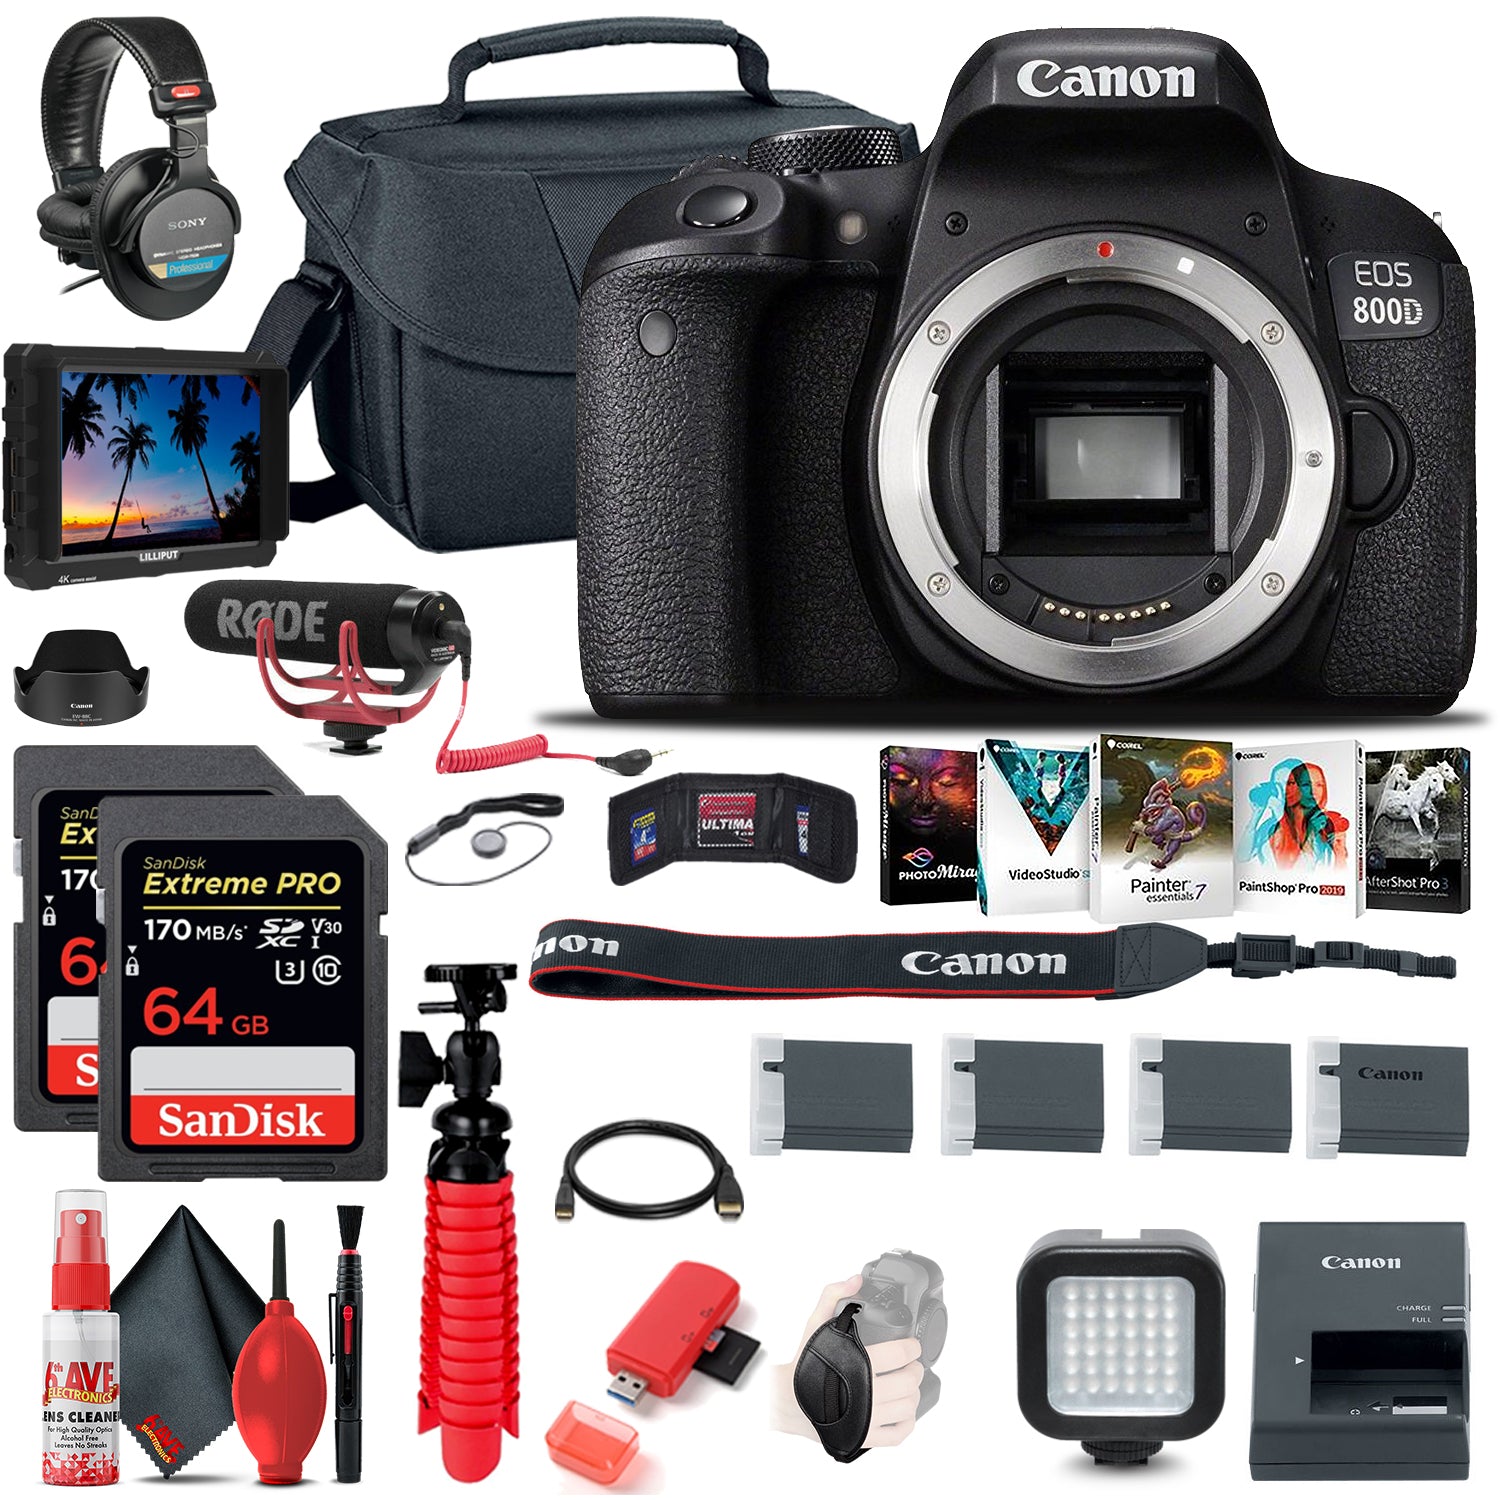 Canon EOS Rebel 800D / T7i DSLR Camera (Body Only) + 4K Monitor + Mic + More